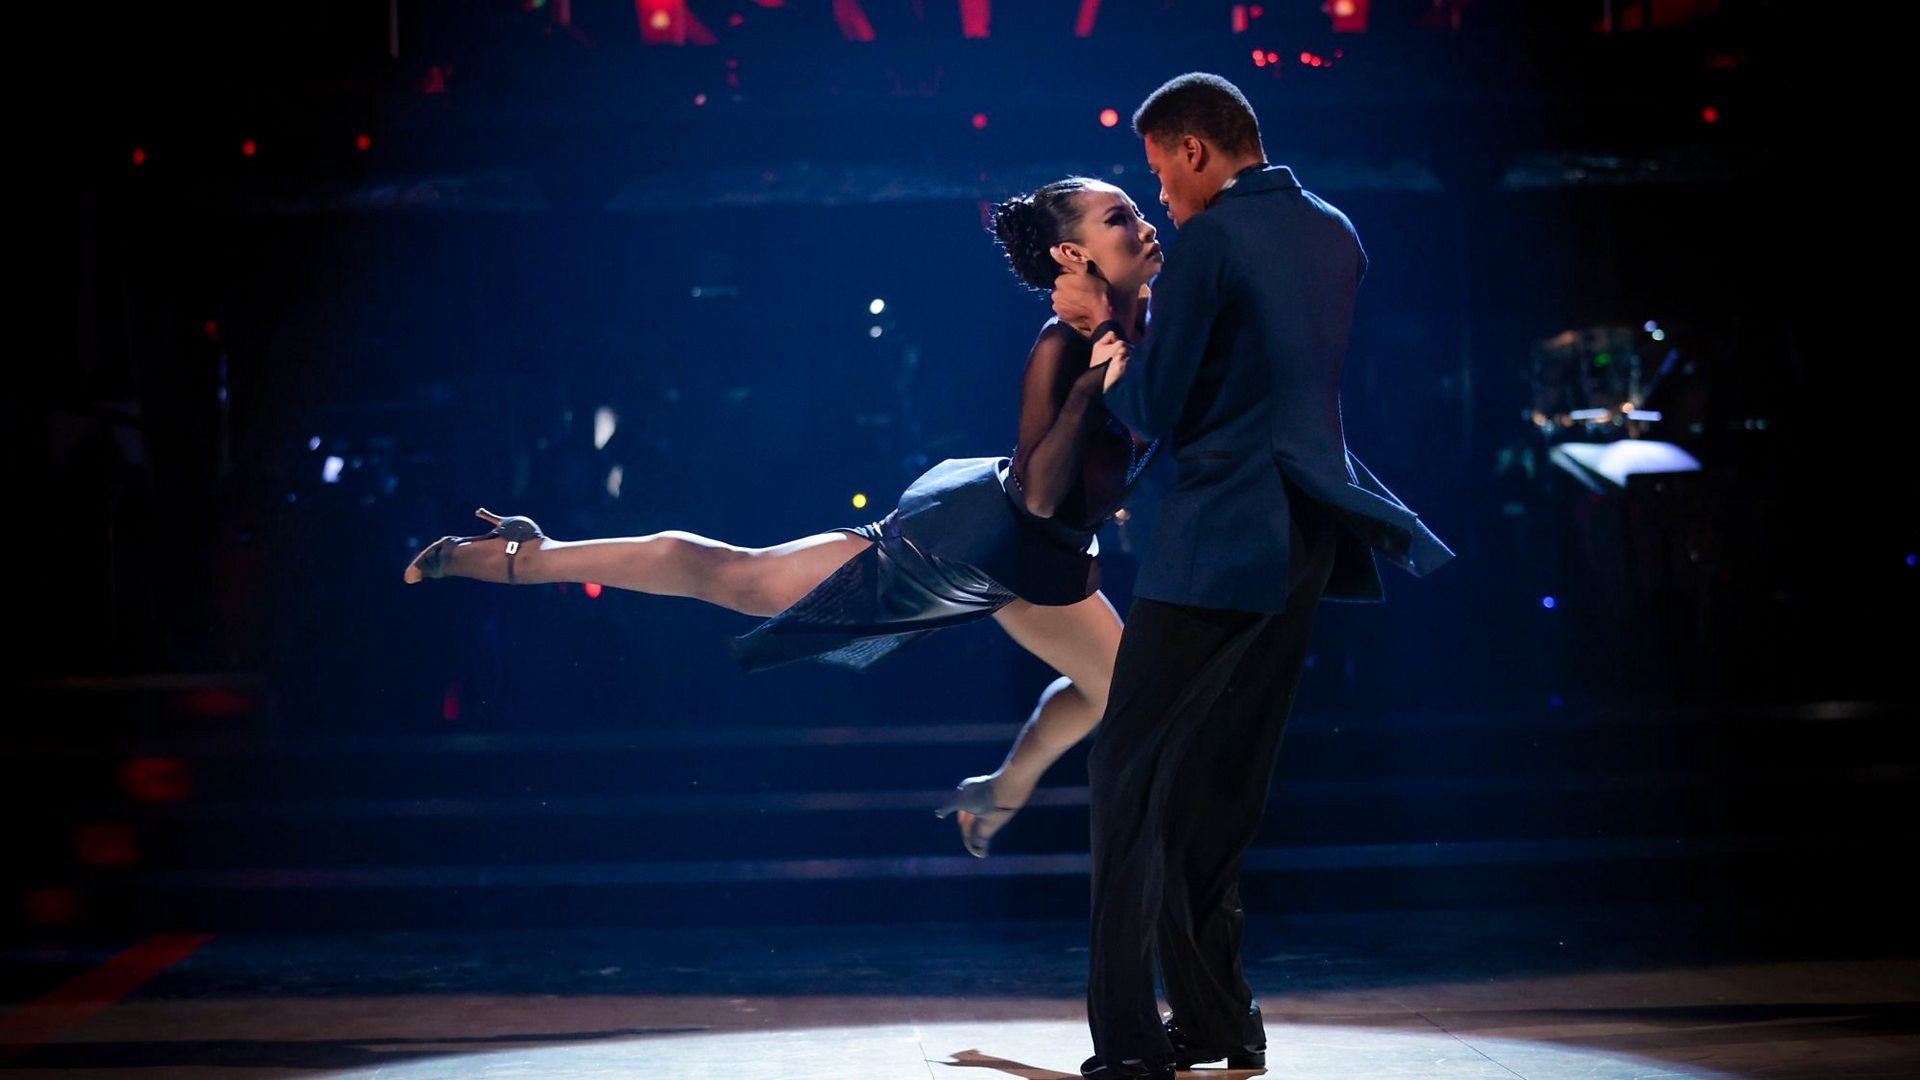 Argentine Tango: Strictly Come Dancing, Show-stopping moments, Quarterfinal, An improvisational dance, BBC One TV show. 1920x1080 Full HD Background.